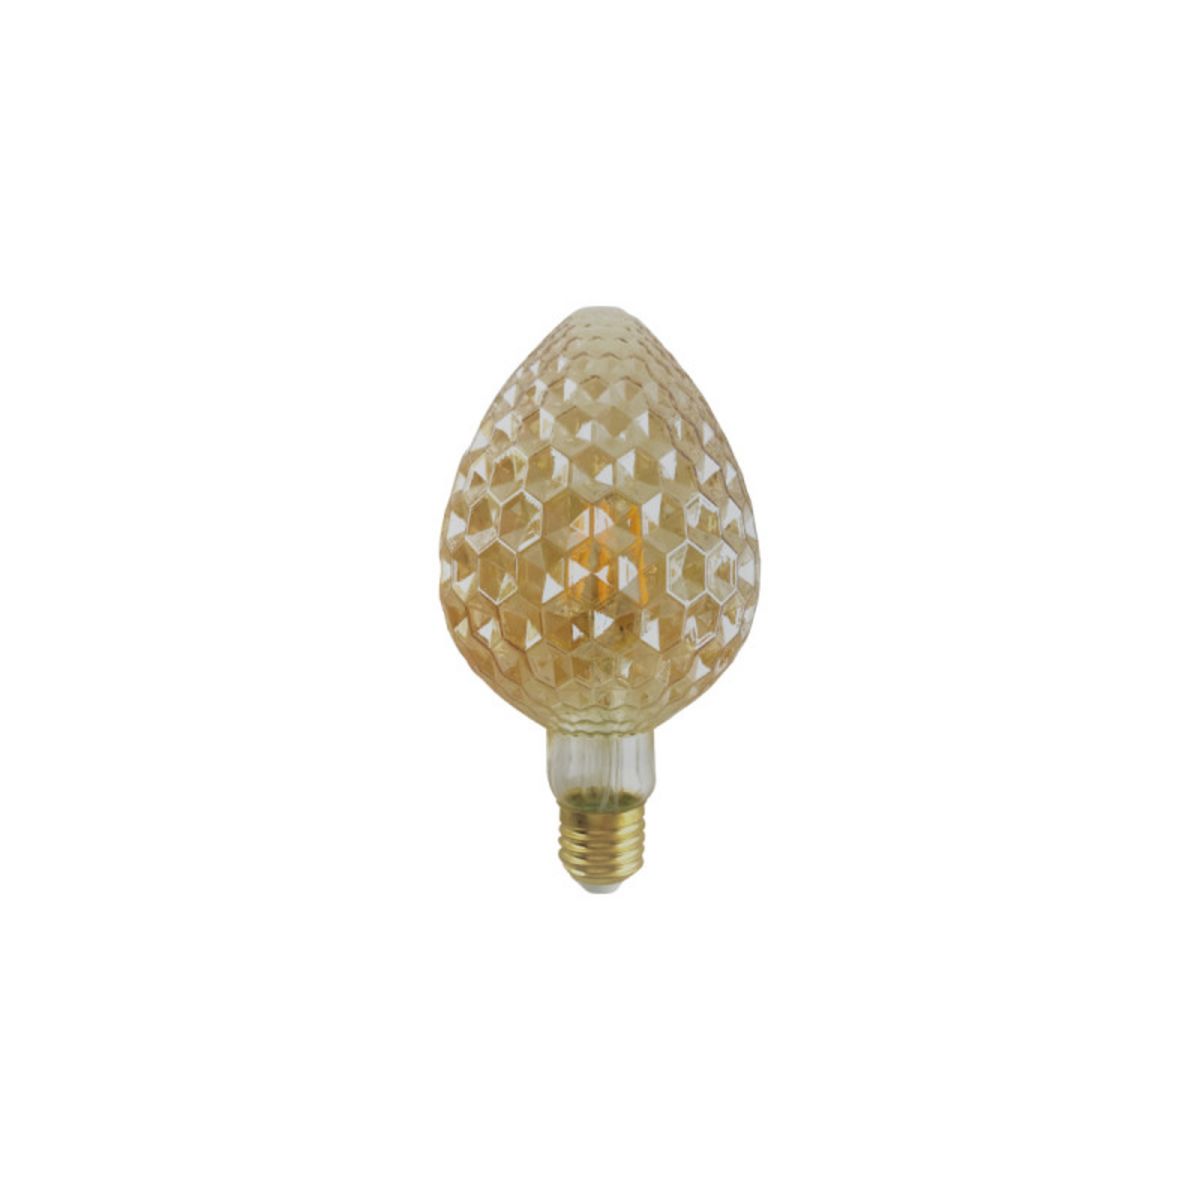  Ampoule LED ananas XXCELL - 6 W - 500 lumens - 2700 K - E27